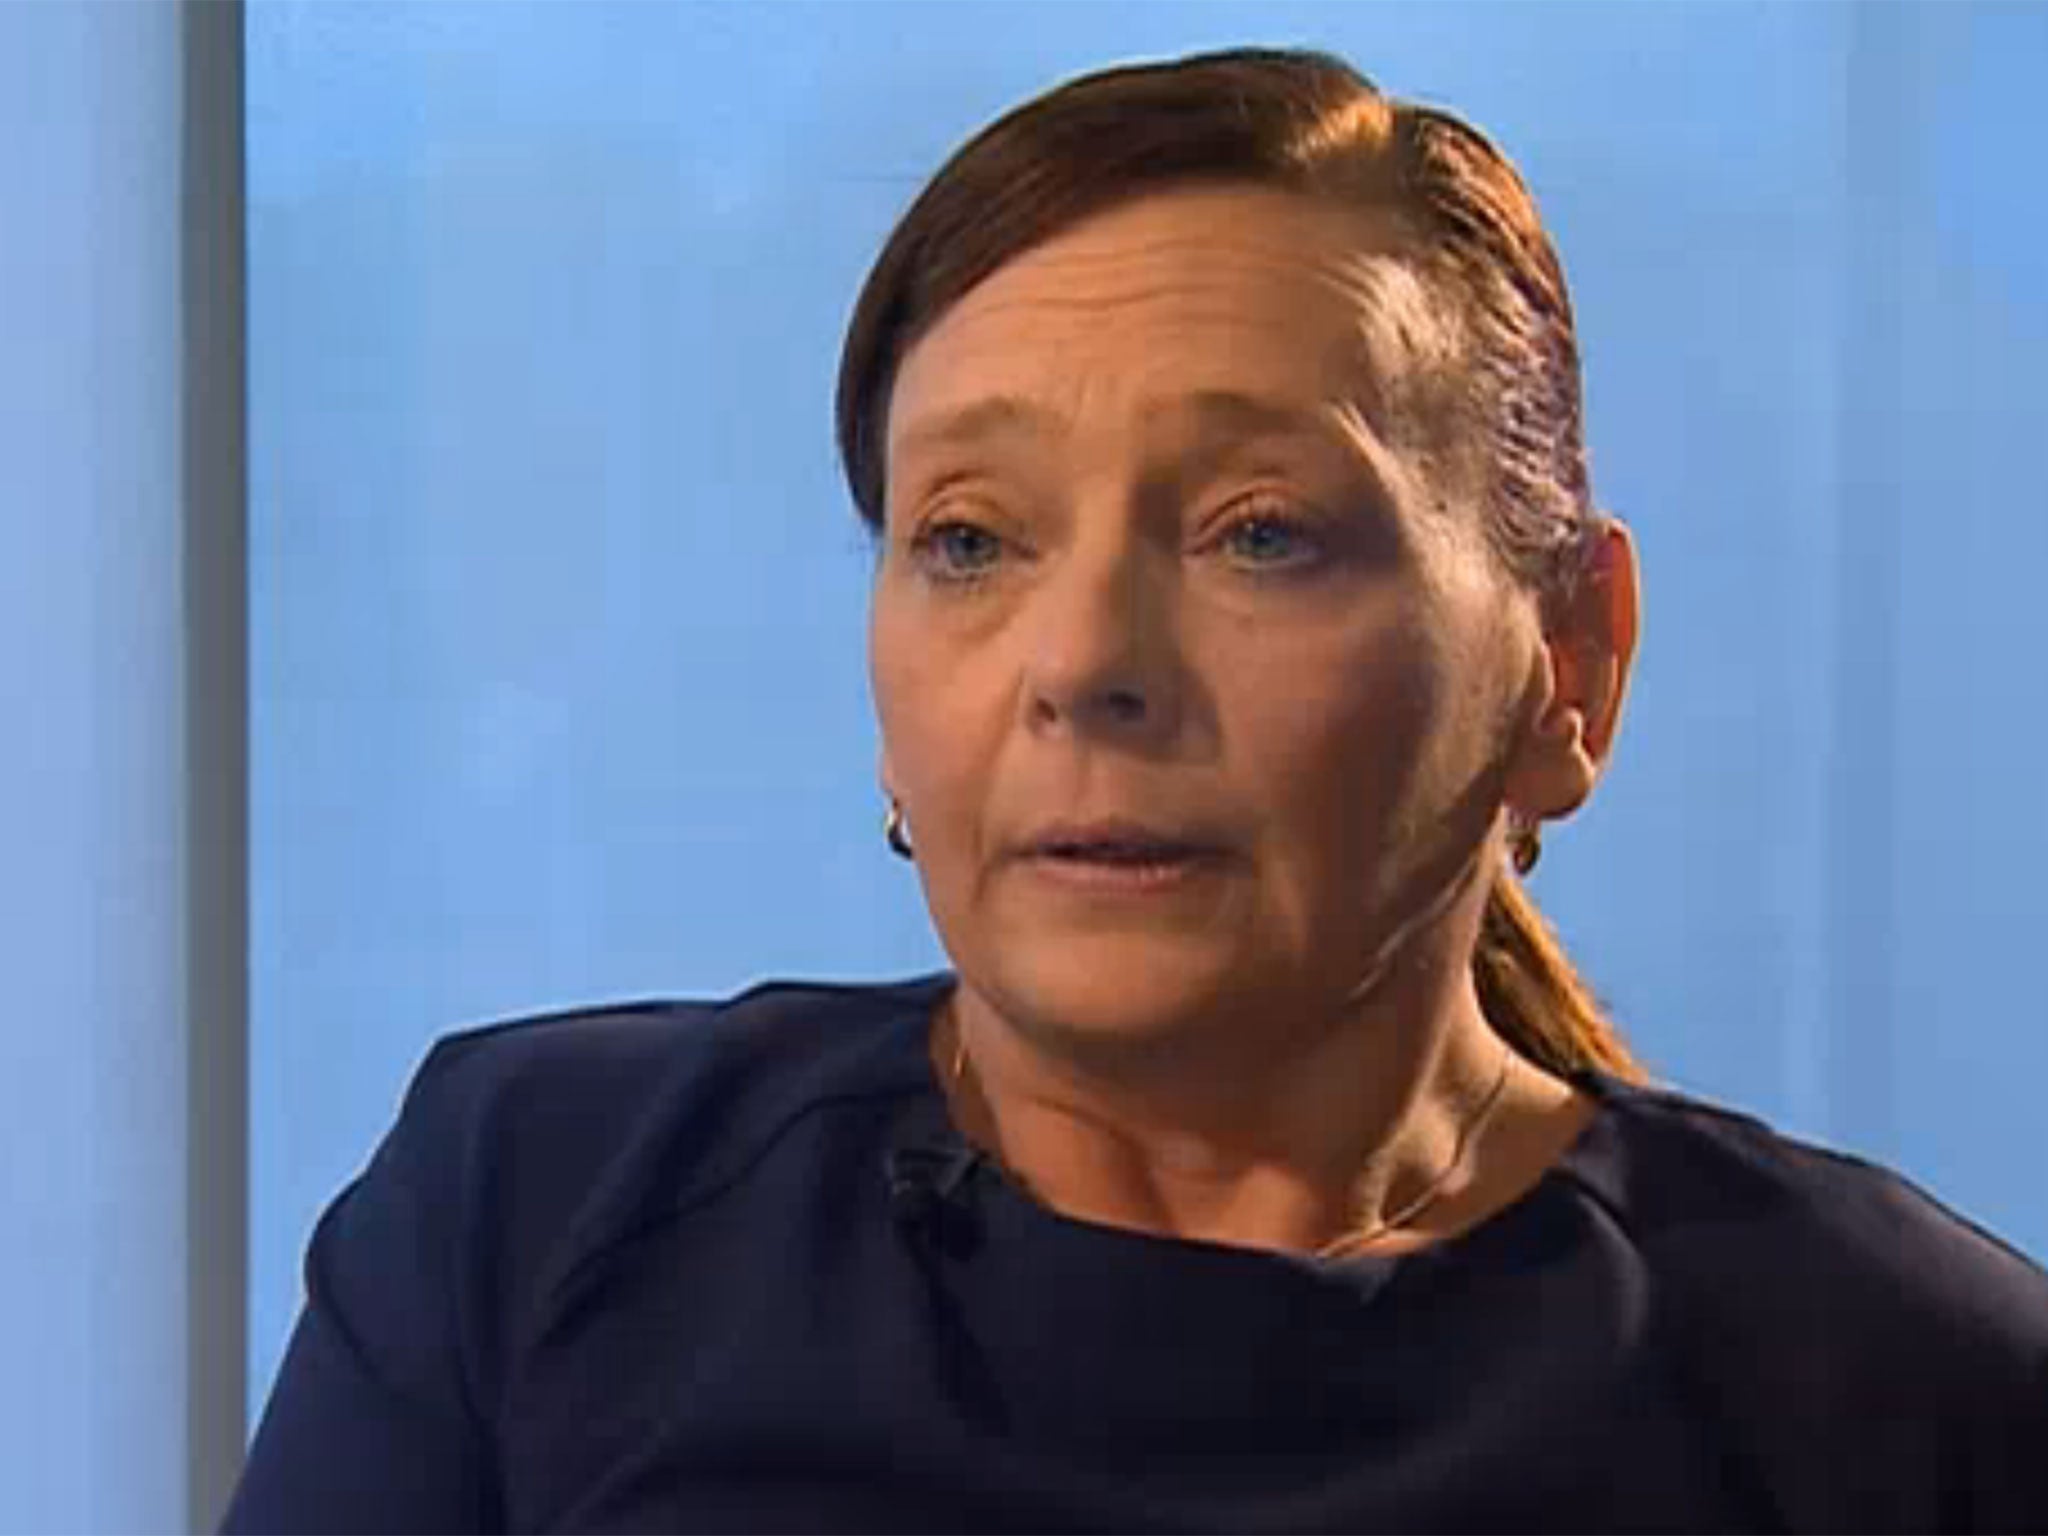 Barbara Henning issued another plea to her husband Alan's captors